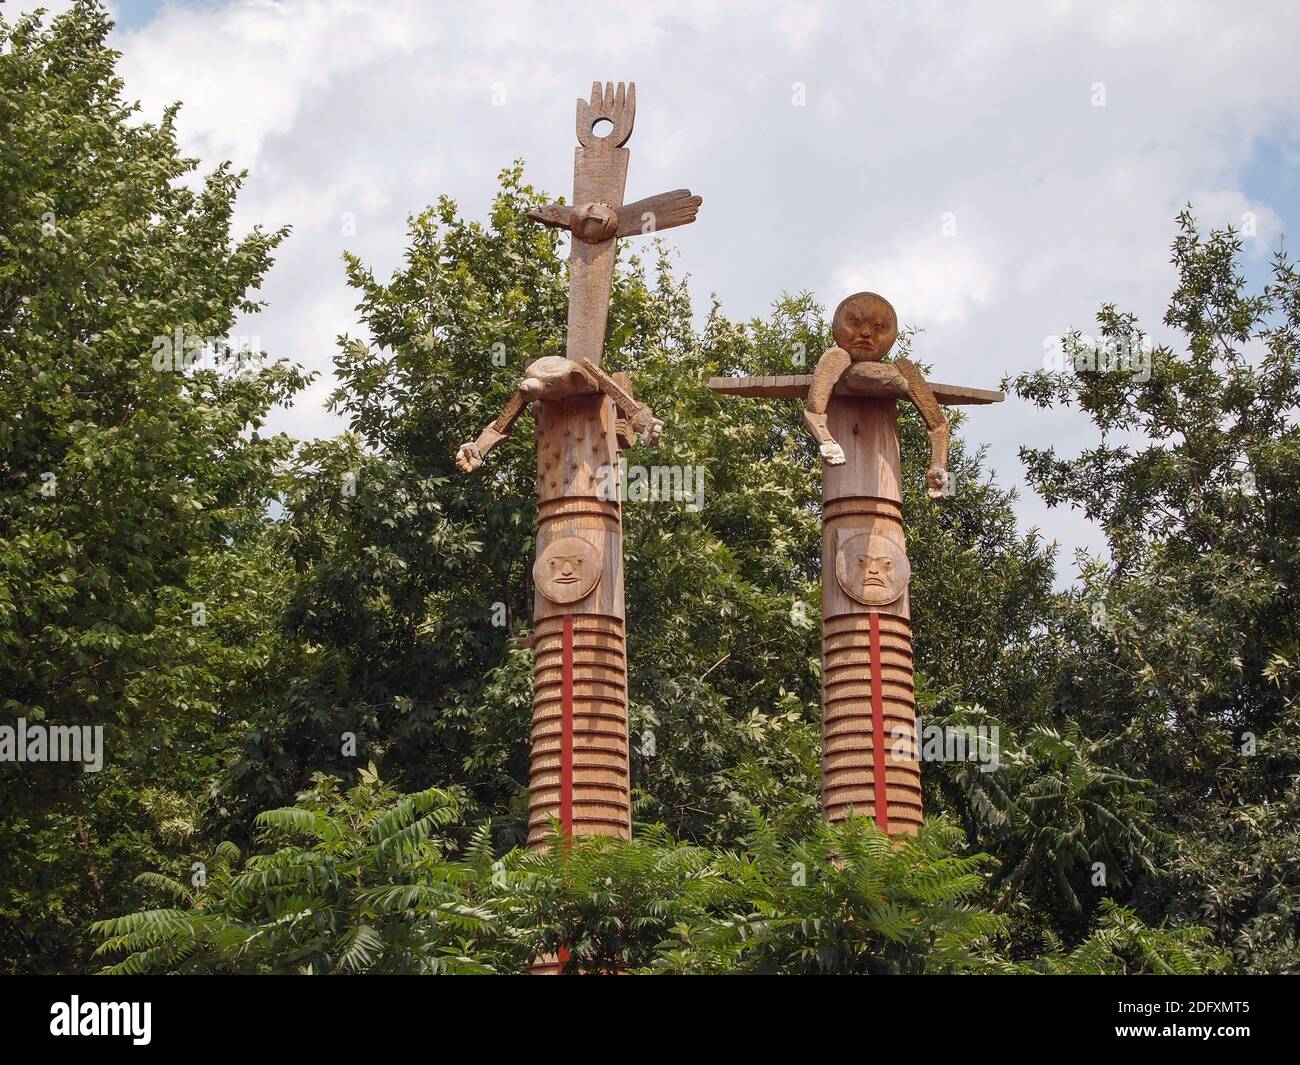 WASHINGTON, DC - JUNE 29, 2015: A pair of sculptures by Native American artist Rick Bartow, titled We Were Always Here stands at the entrance to the S Stock Photo